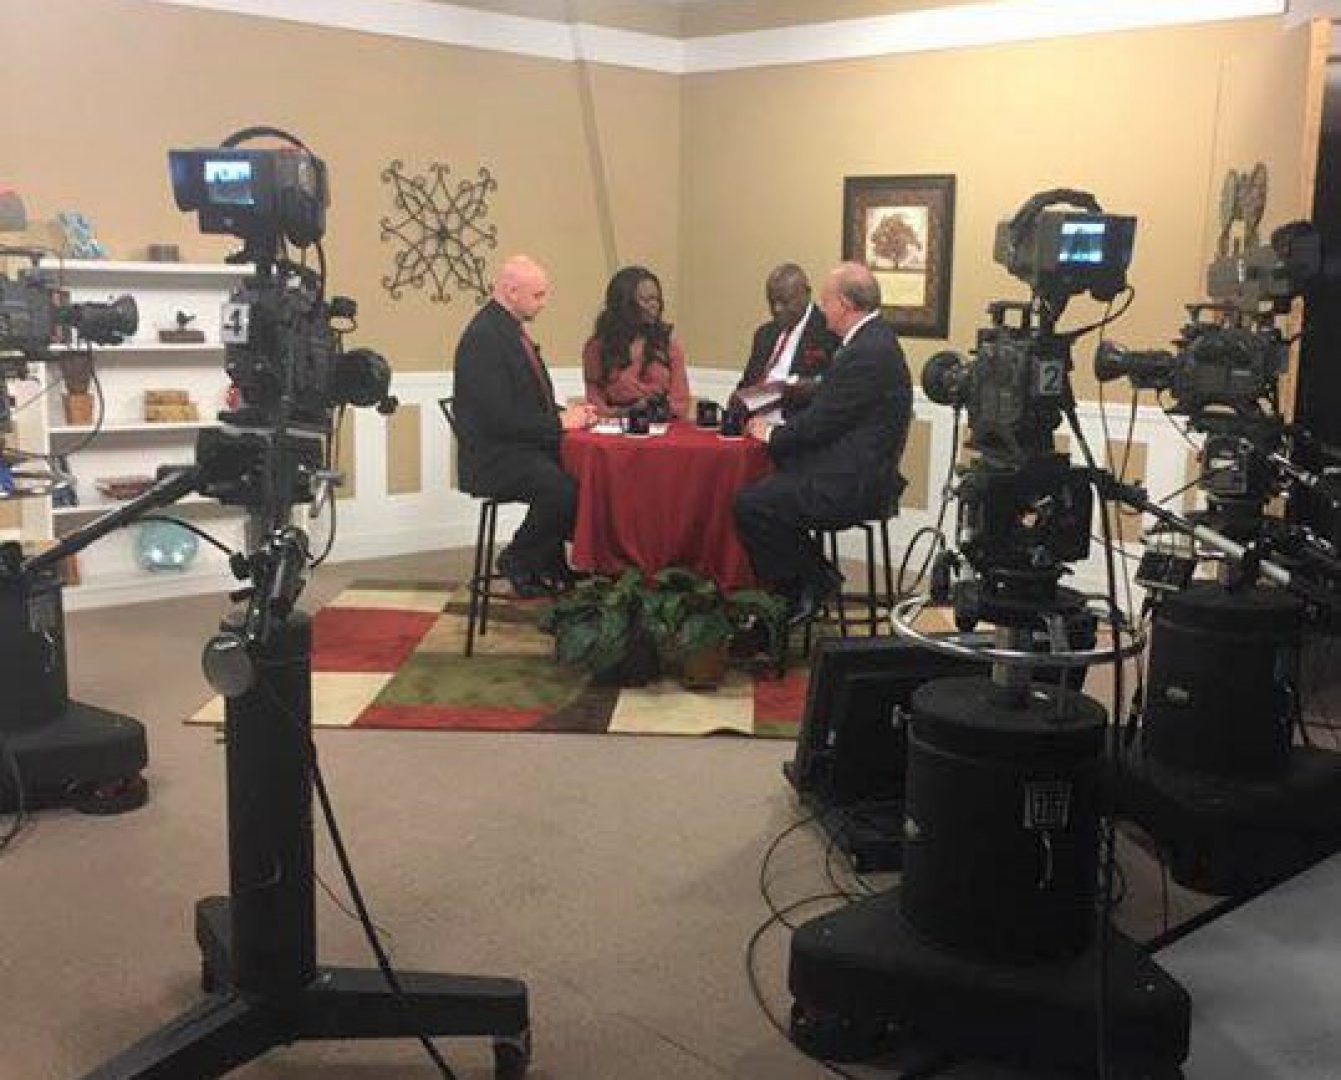 The Dereck Whittenburg Foundation Interview with Richard and Crystal McCorkell on The Reconnect Live TCT Network